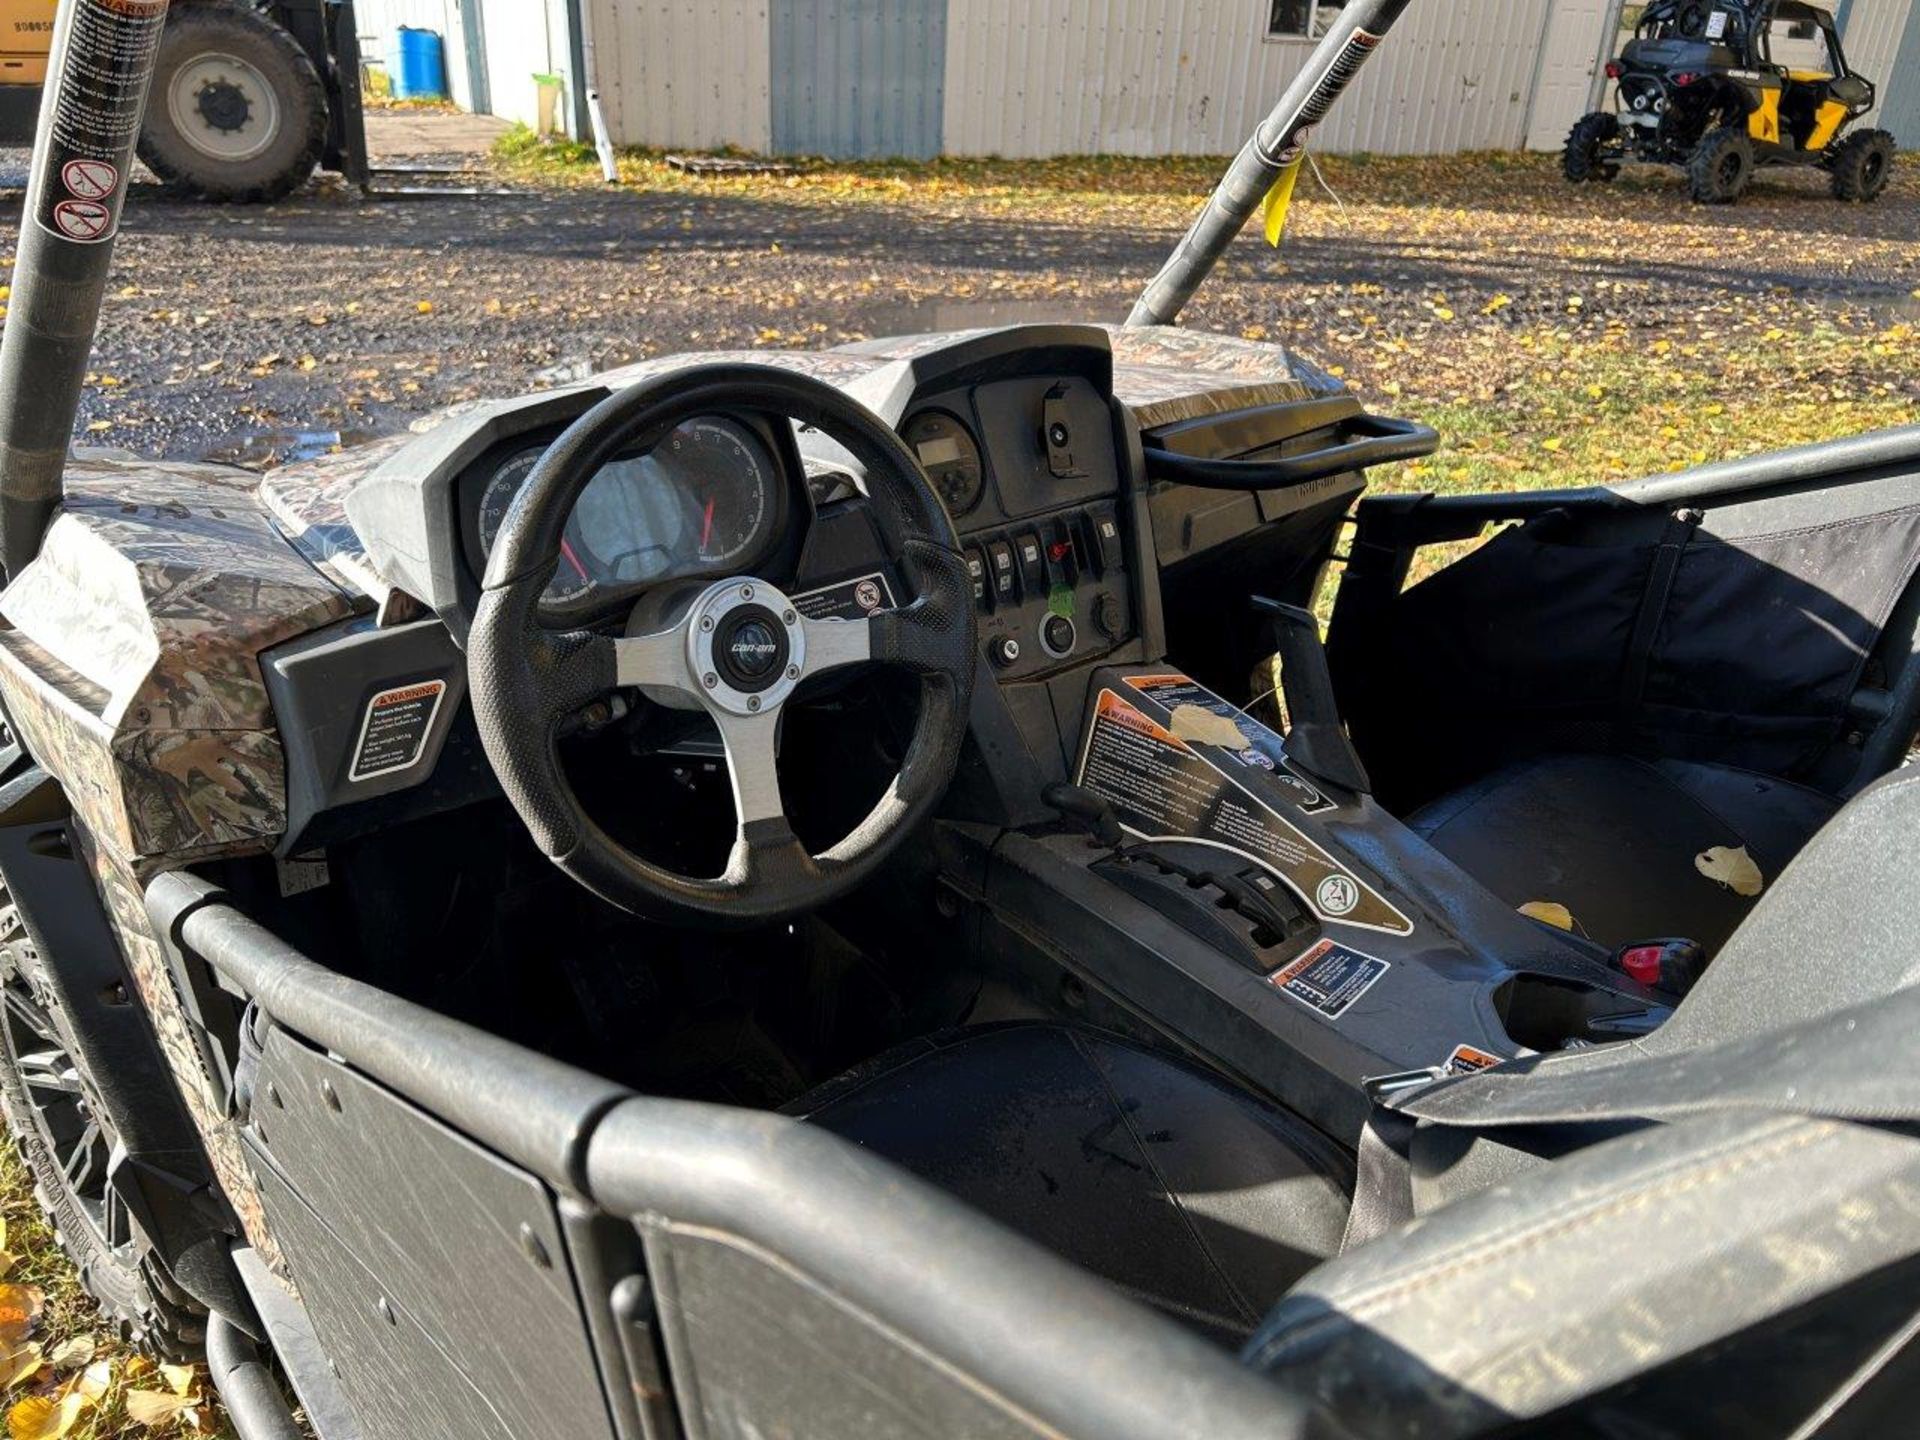 **LOCATED AT MAS** 2012 CAN AM COMMANDER XT ATV, 1000 CC, DUMP BOX, ROOF, NEW BRAKES, WHEEL BNGS, FU - Image 4 of 9